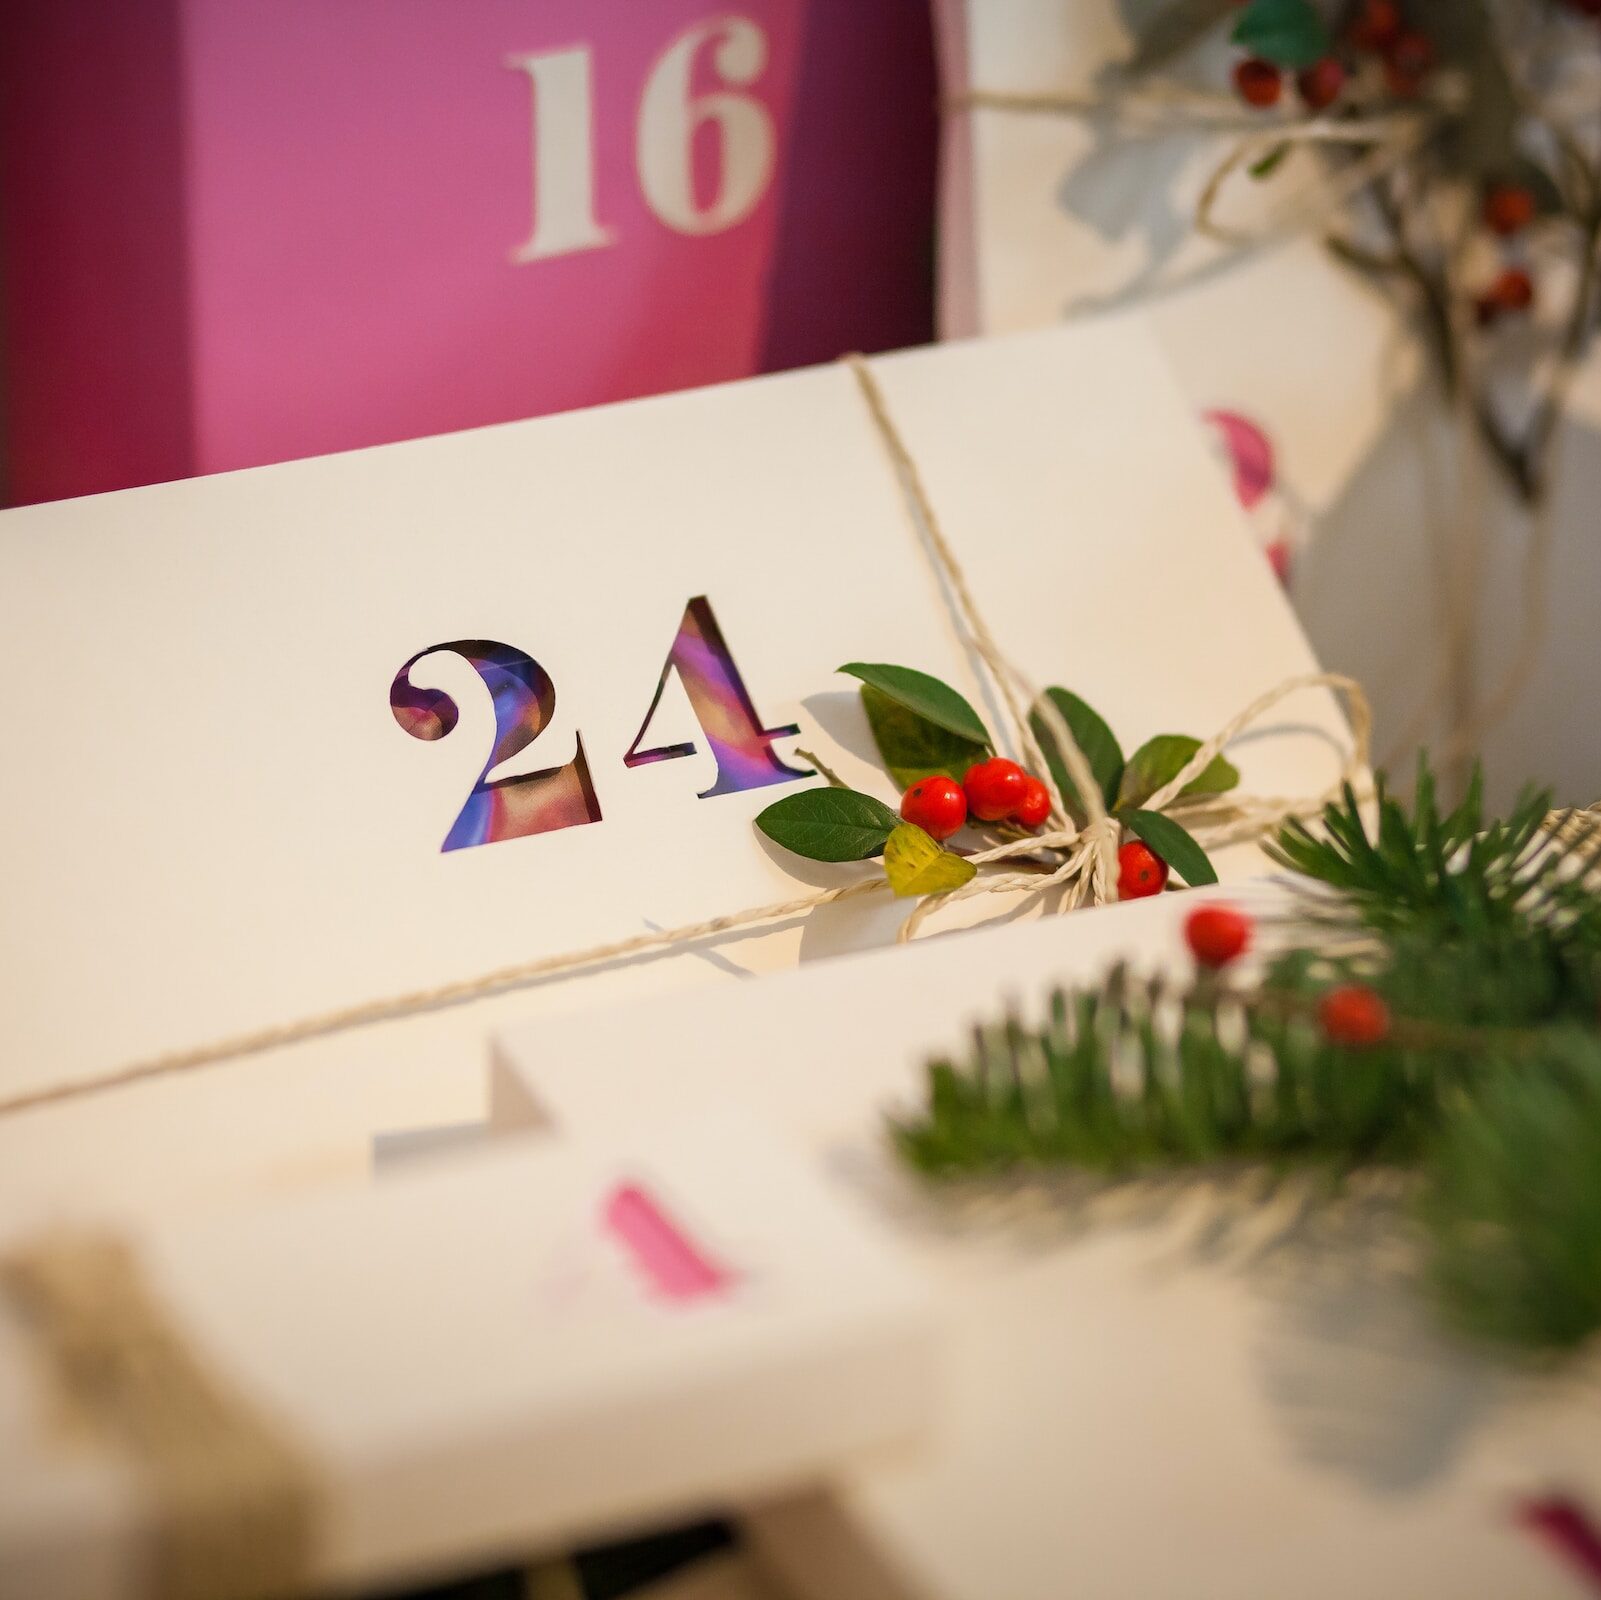 An Advent Calendar style set of boxes in pink and white, with the 24th box in the centre and pieces of holly around it to celebrate Christmas Eve.